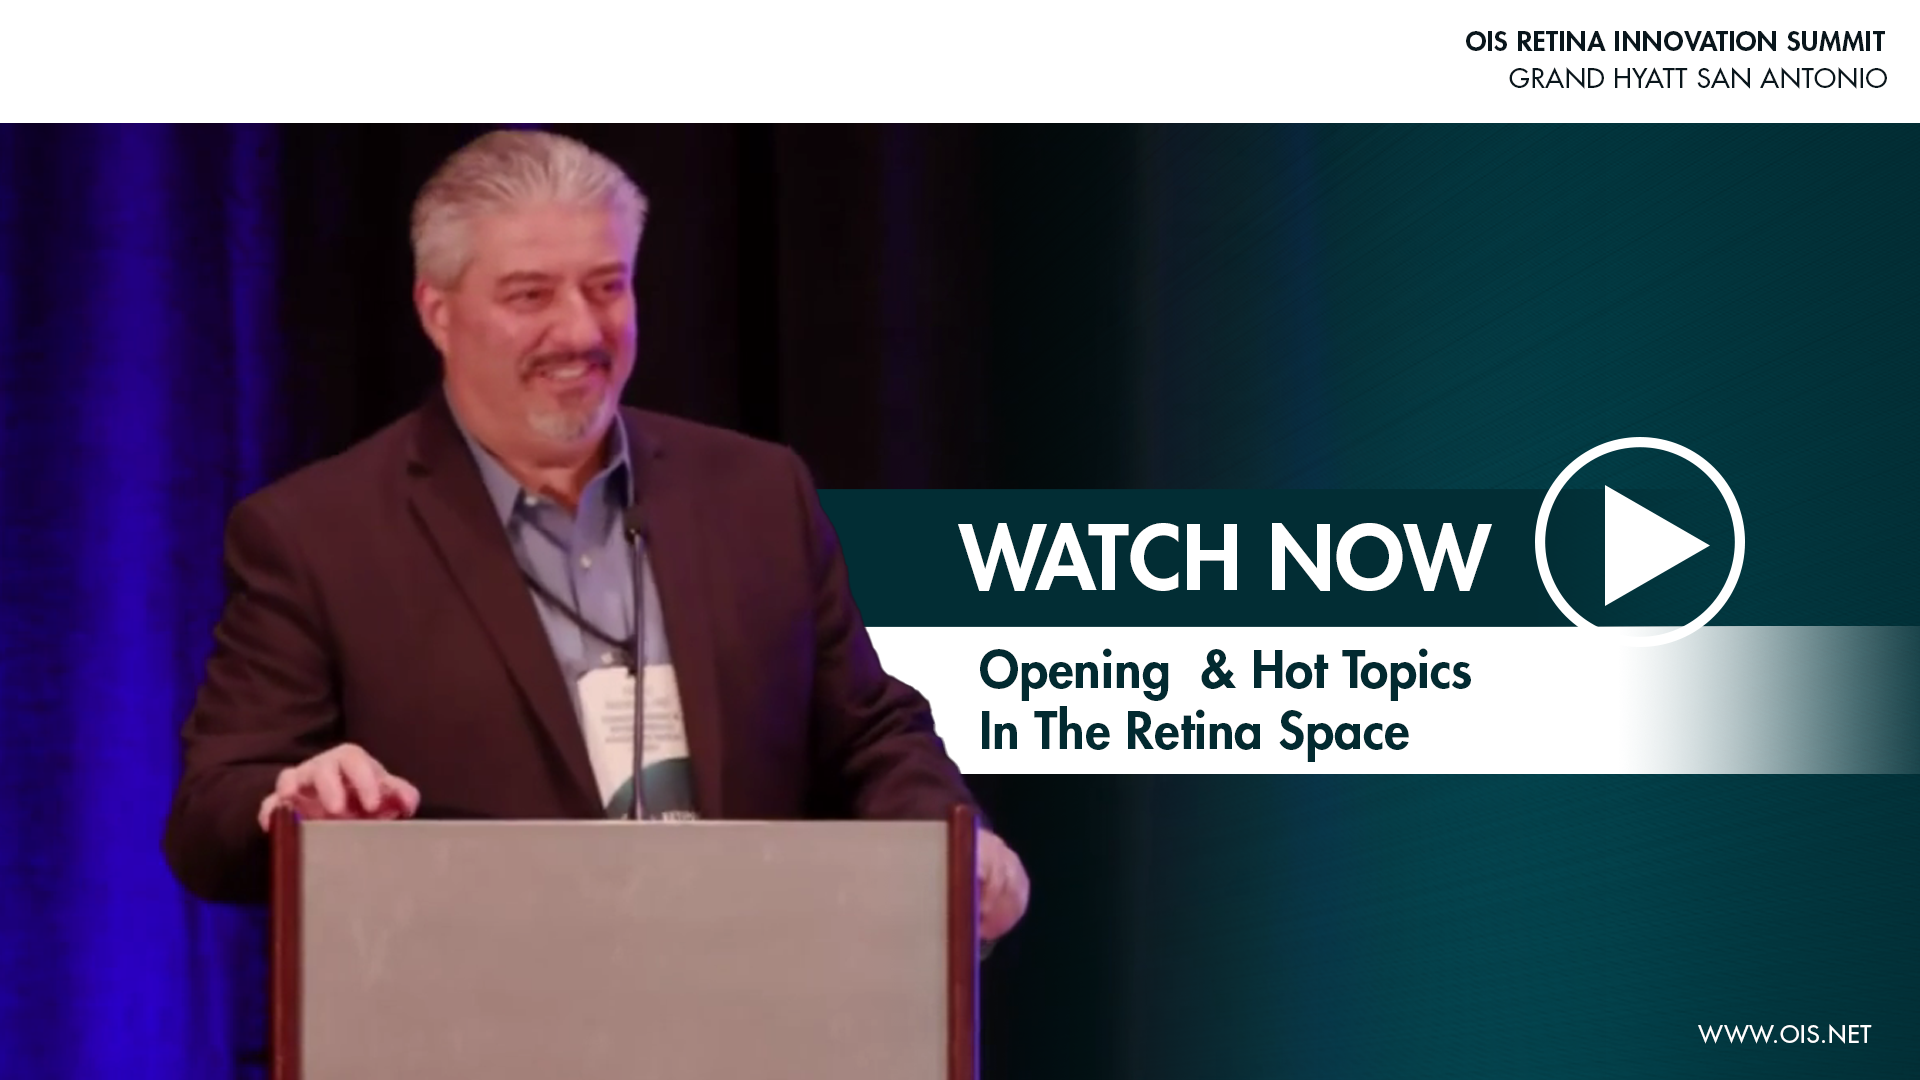 Watch Now - Opening & Hot Topics In The Retina Space